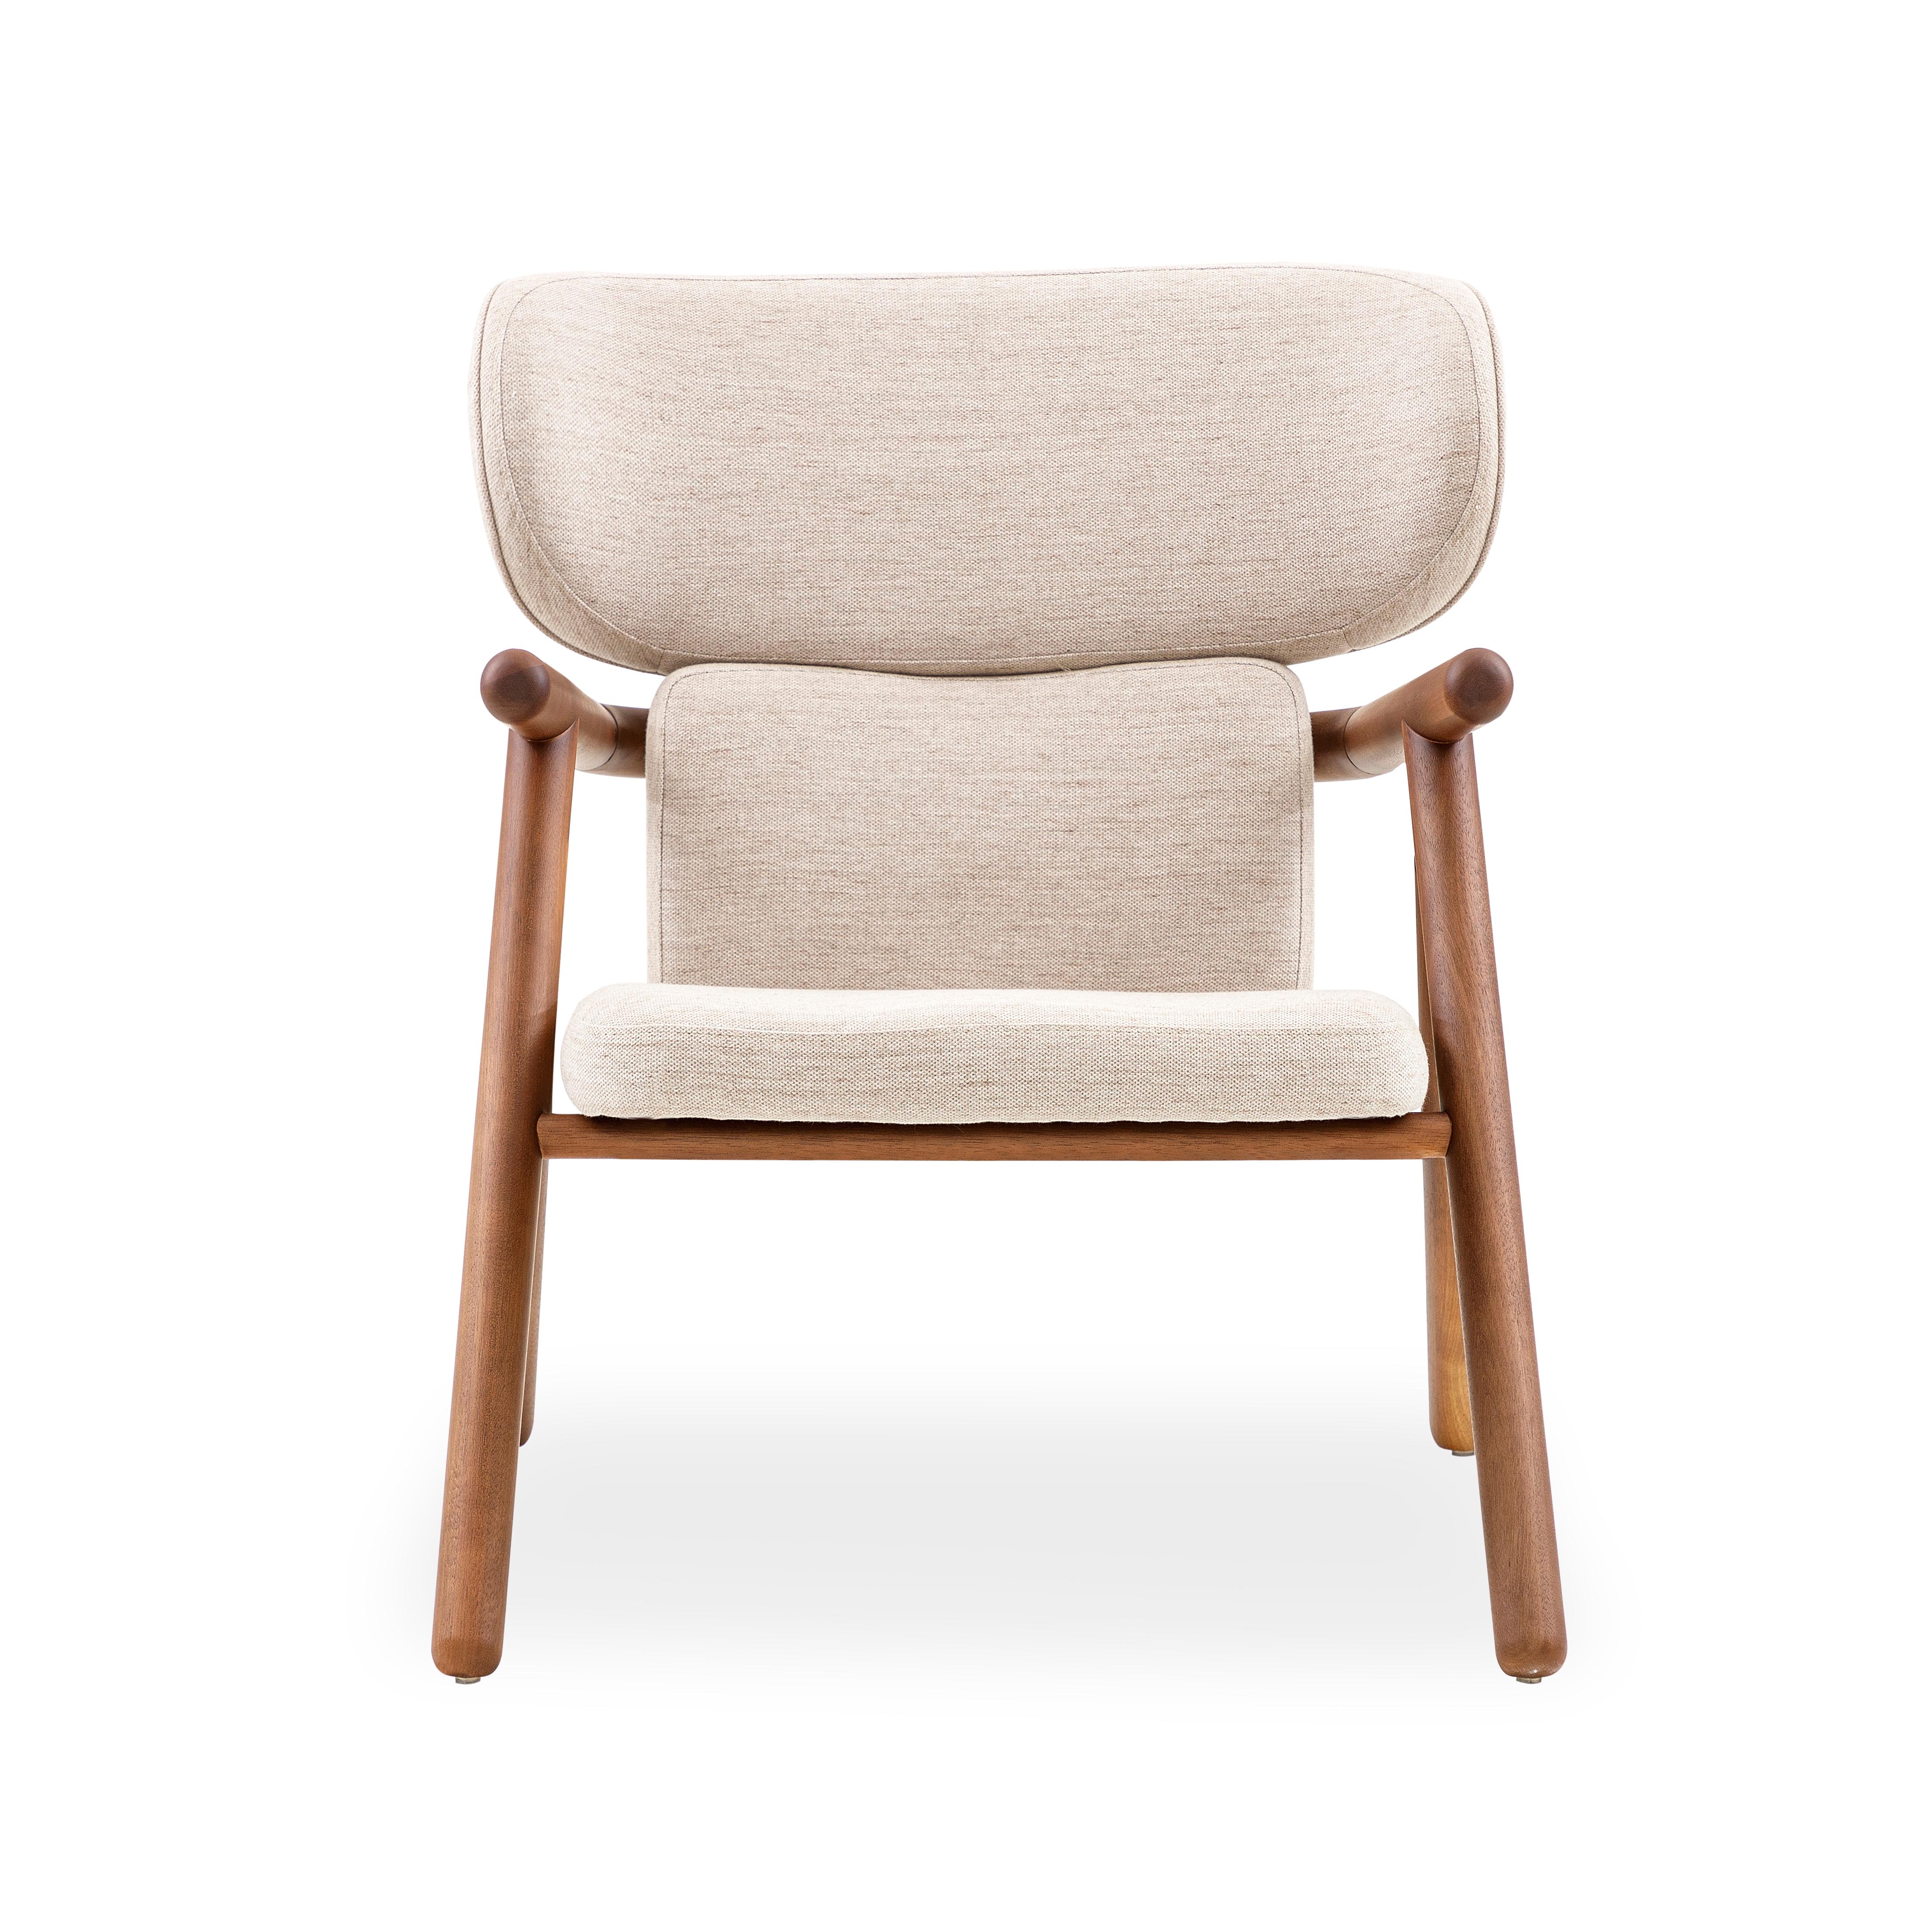 Contemporary Sole Scandinavian-Styled Armchair in Walnut Wood Finish and Off-White Fabric For Sale